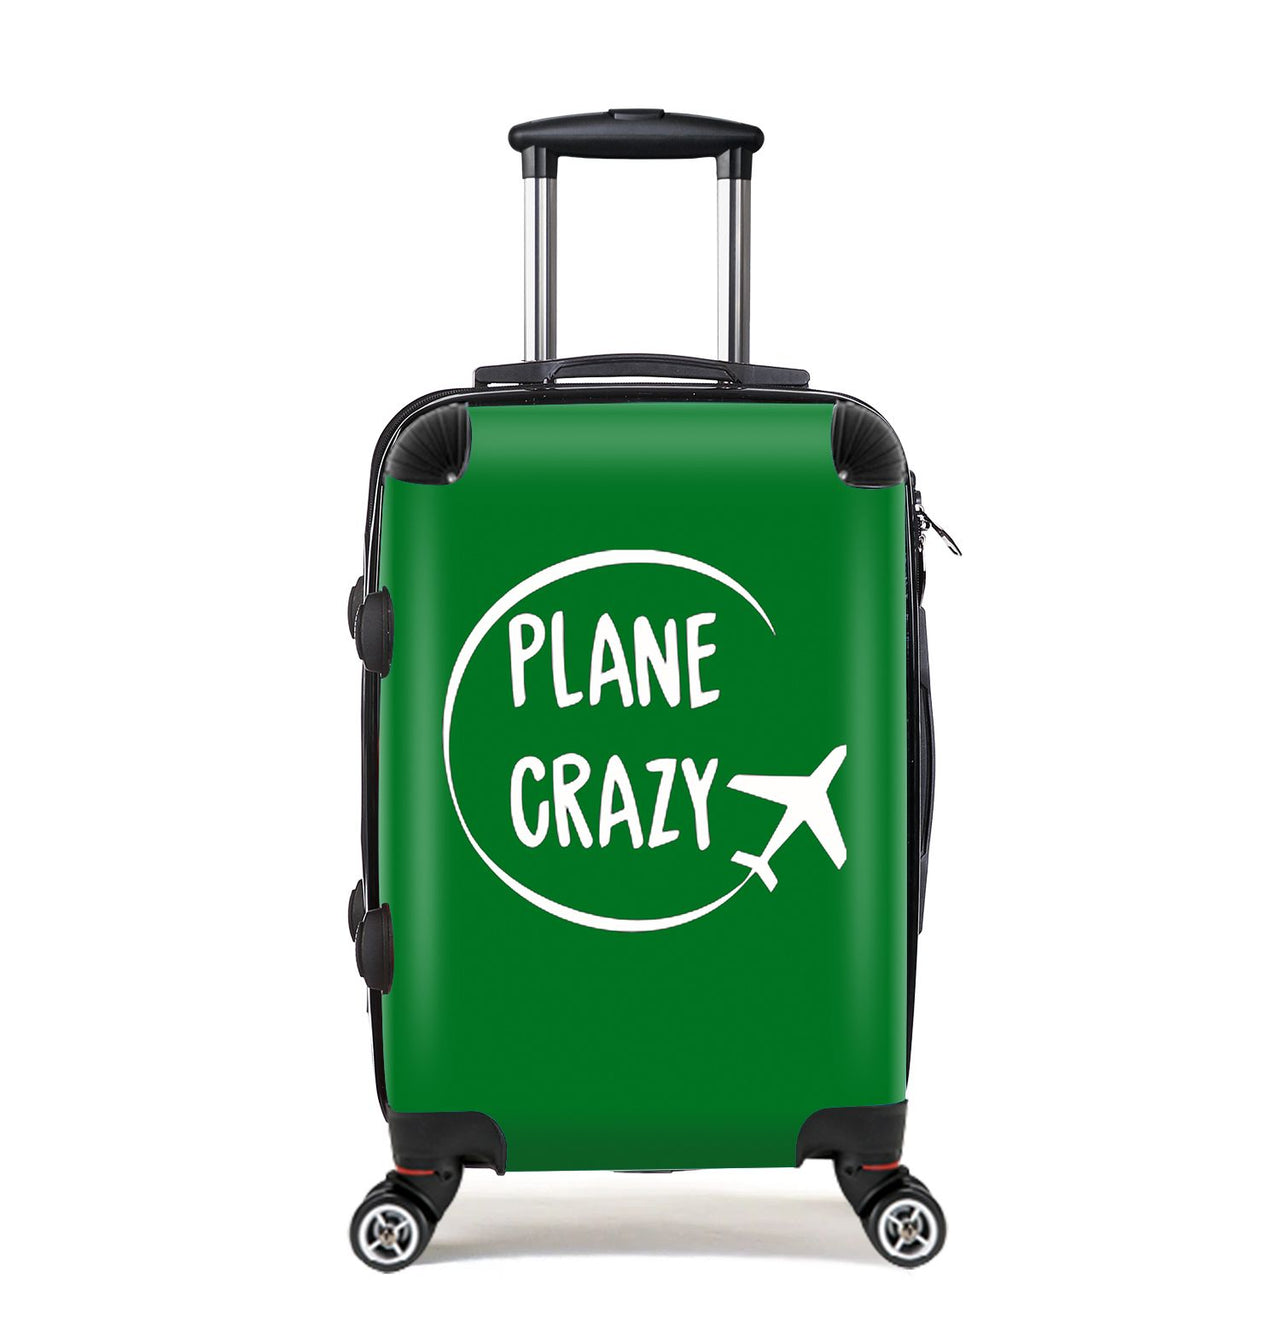 Plane Crazy Designed Cabin Size Luggages